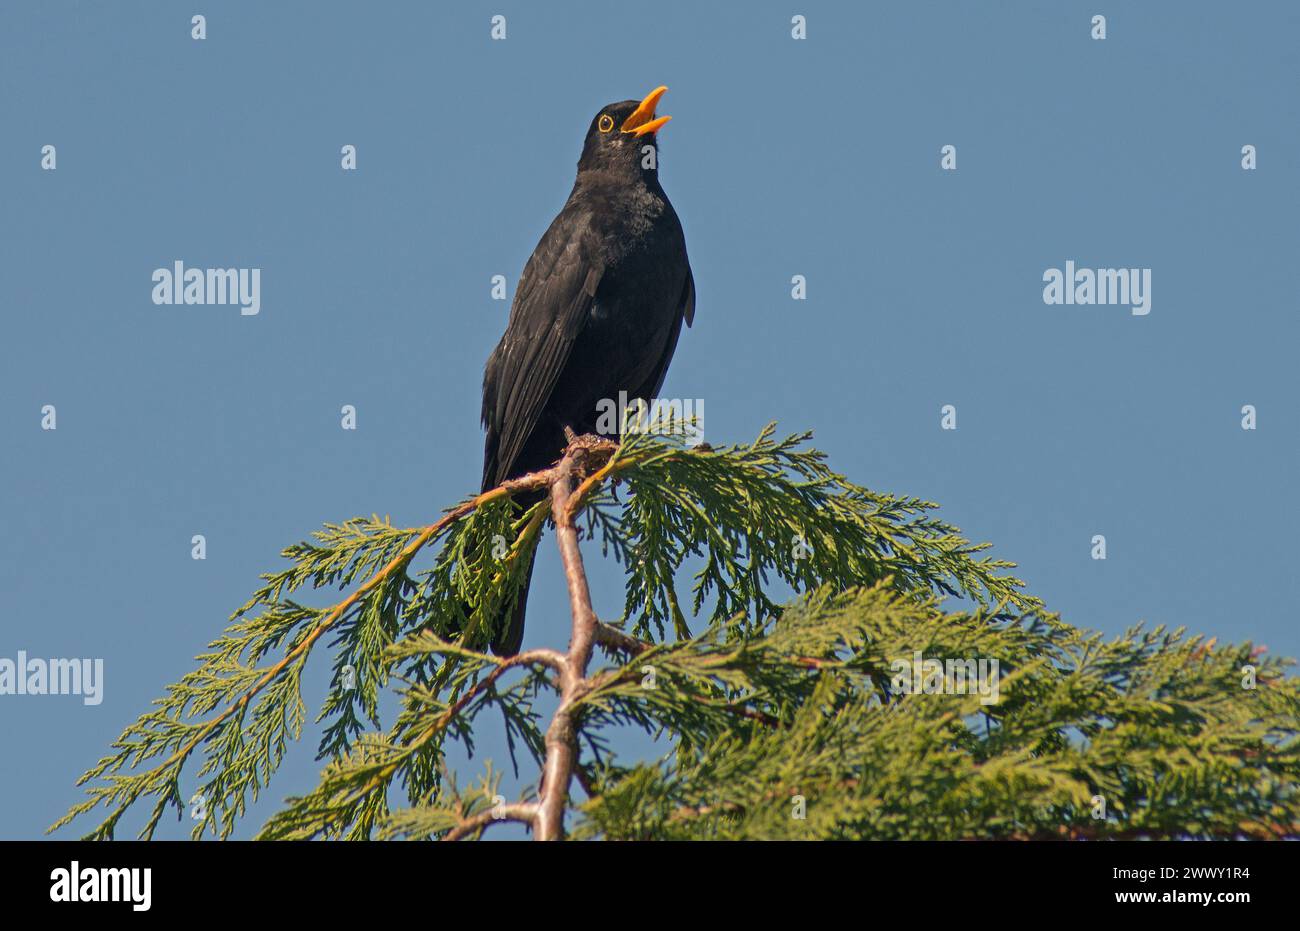 Blackbird perched and singing heartily perched on a conifer branch against a brilliant blue sky Stock Photo